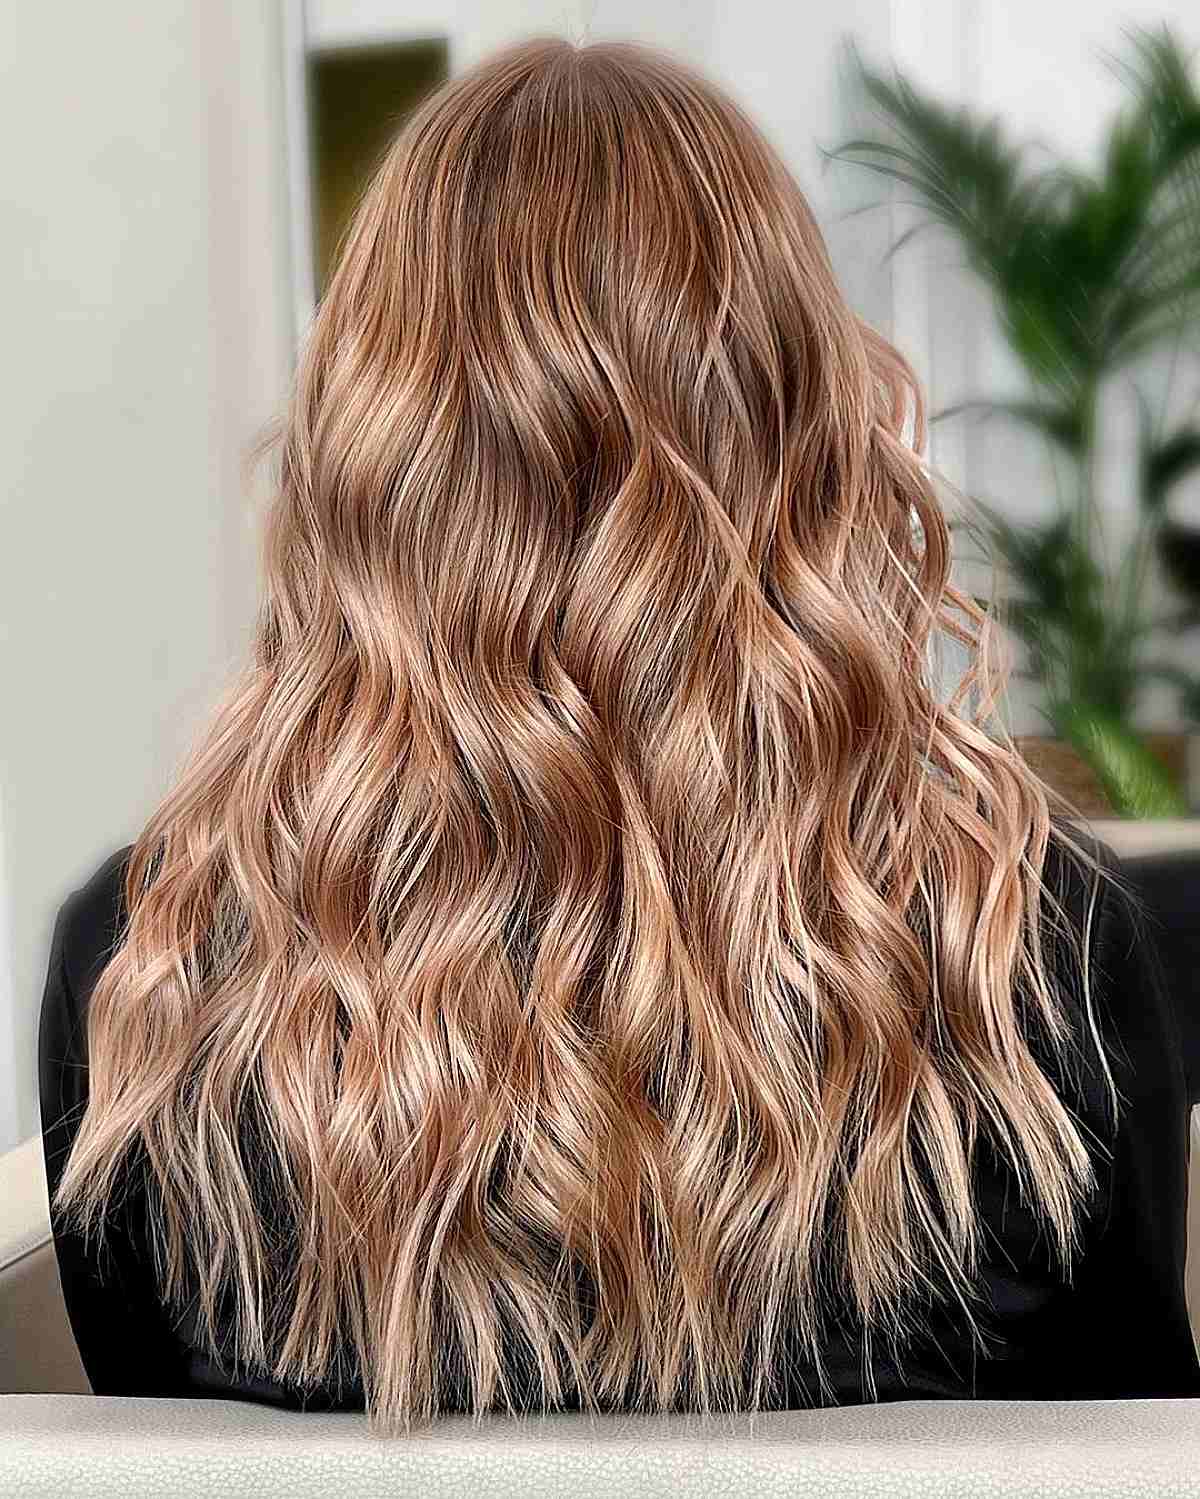 33 Best Golden Blonde Hair Color Ideas for Your Skin Tone